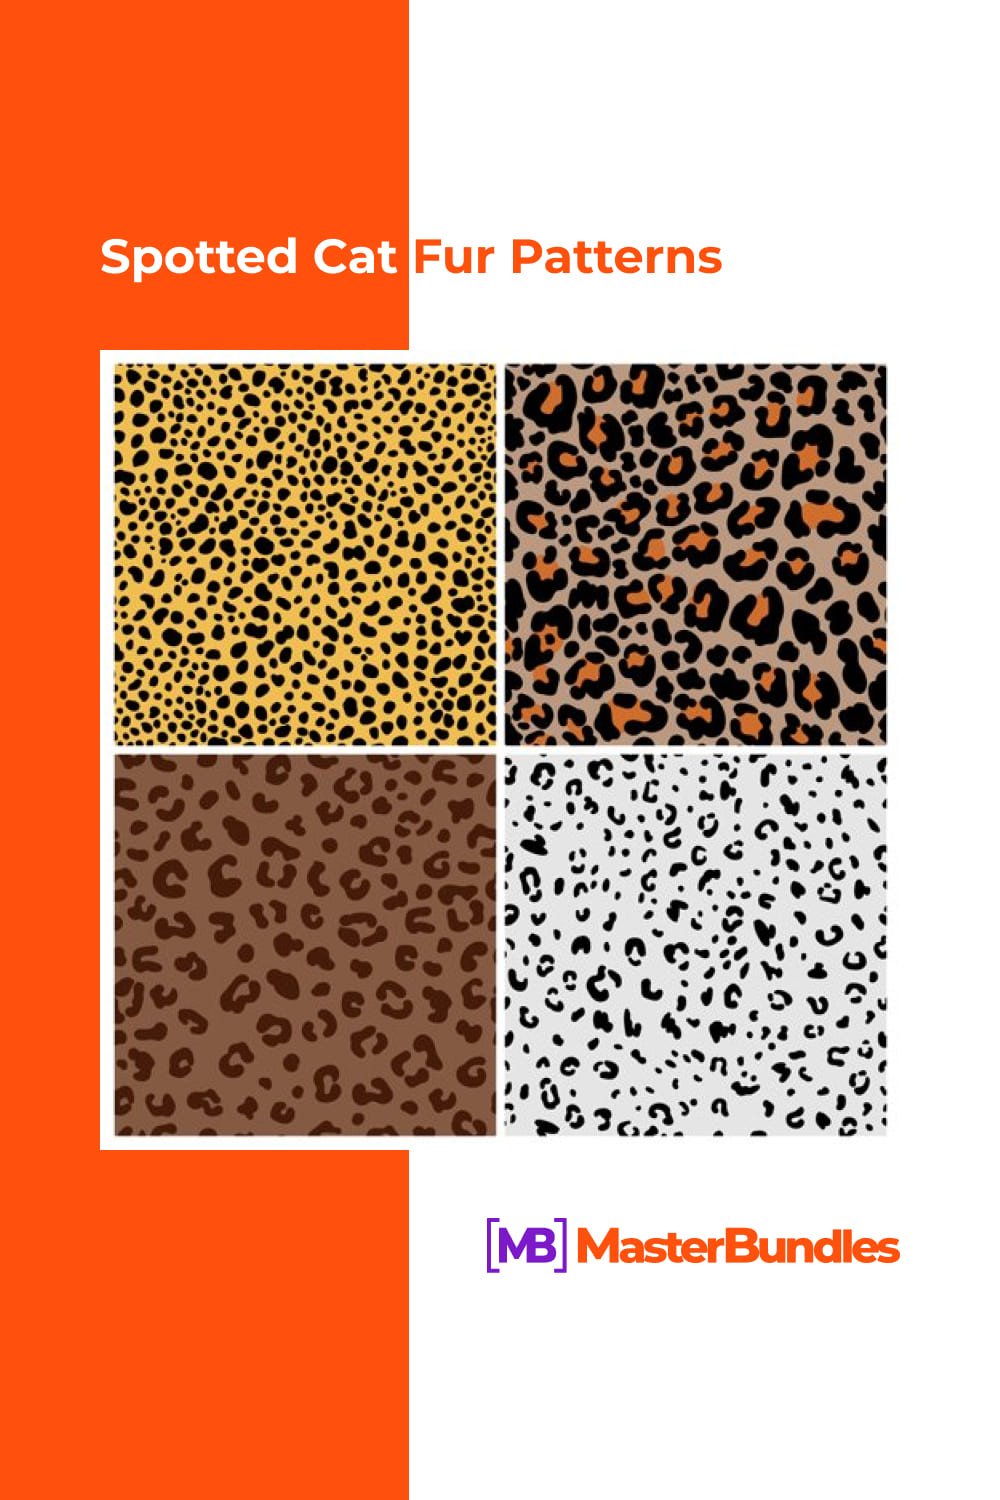 Spotted Cat Fur Patterns.